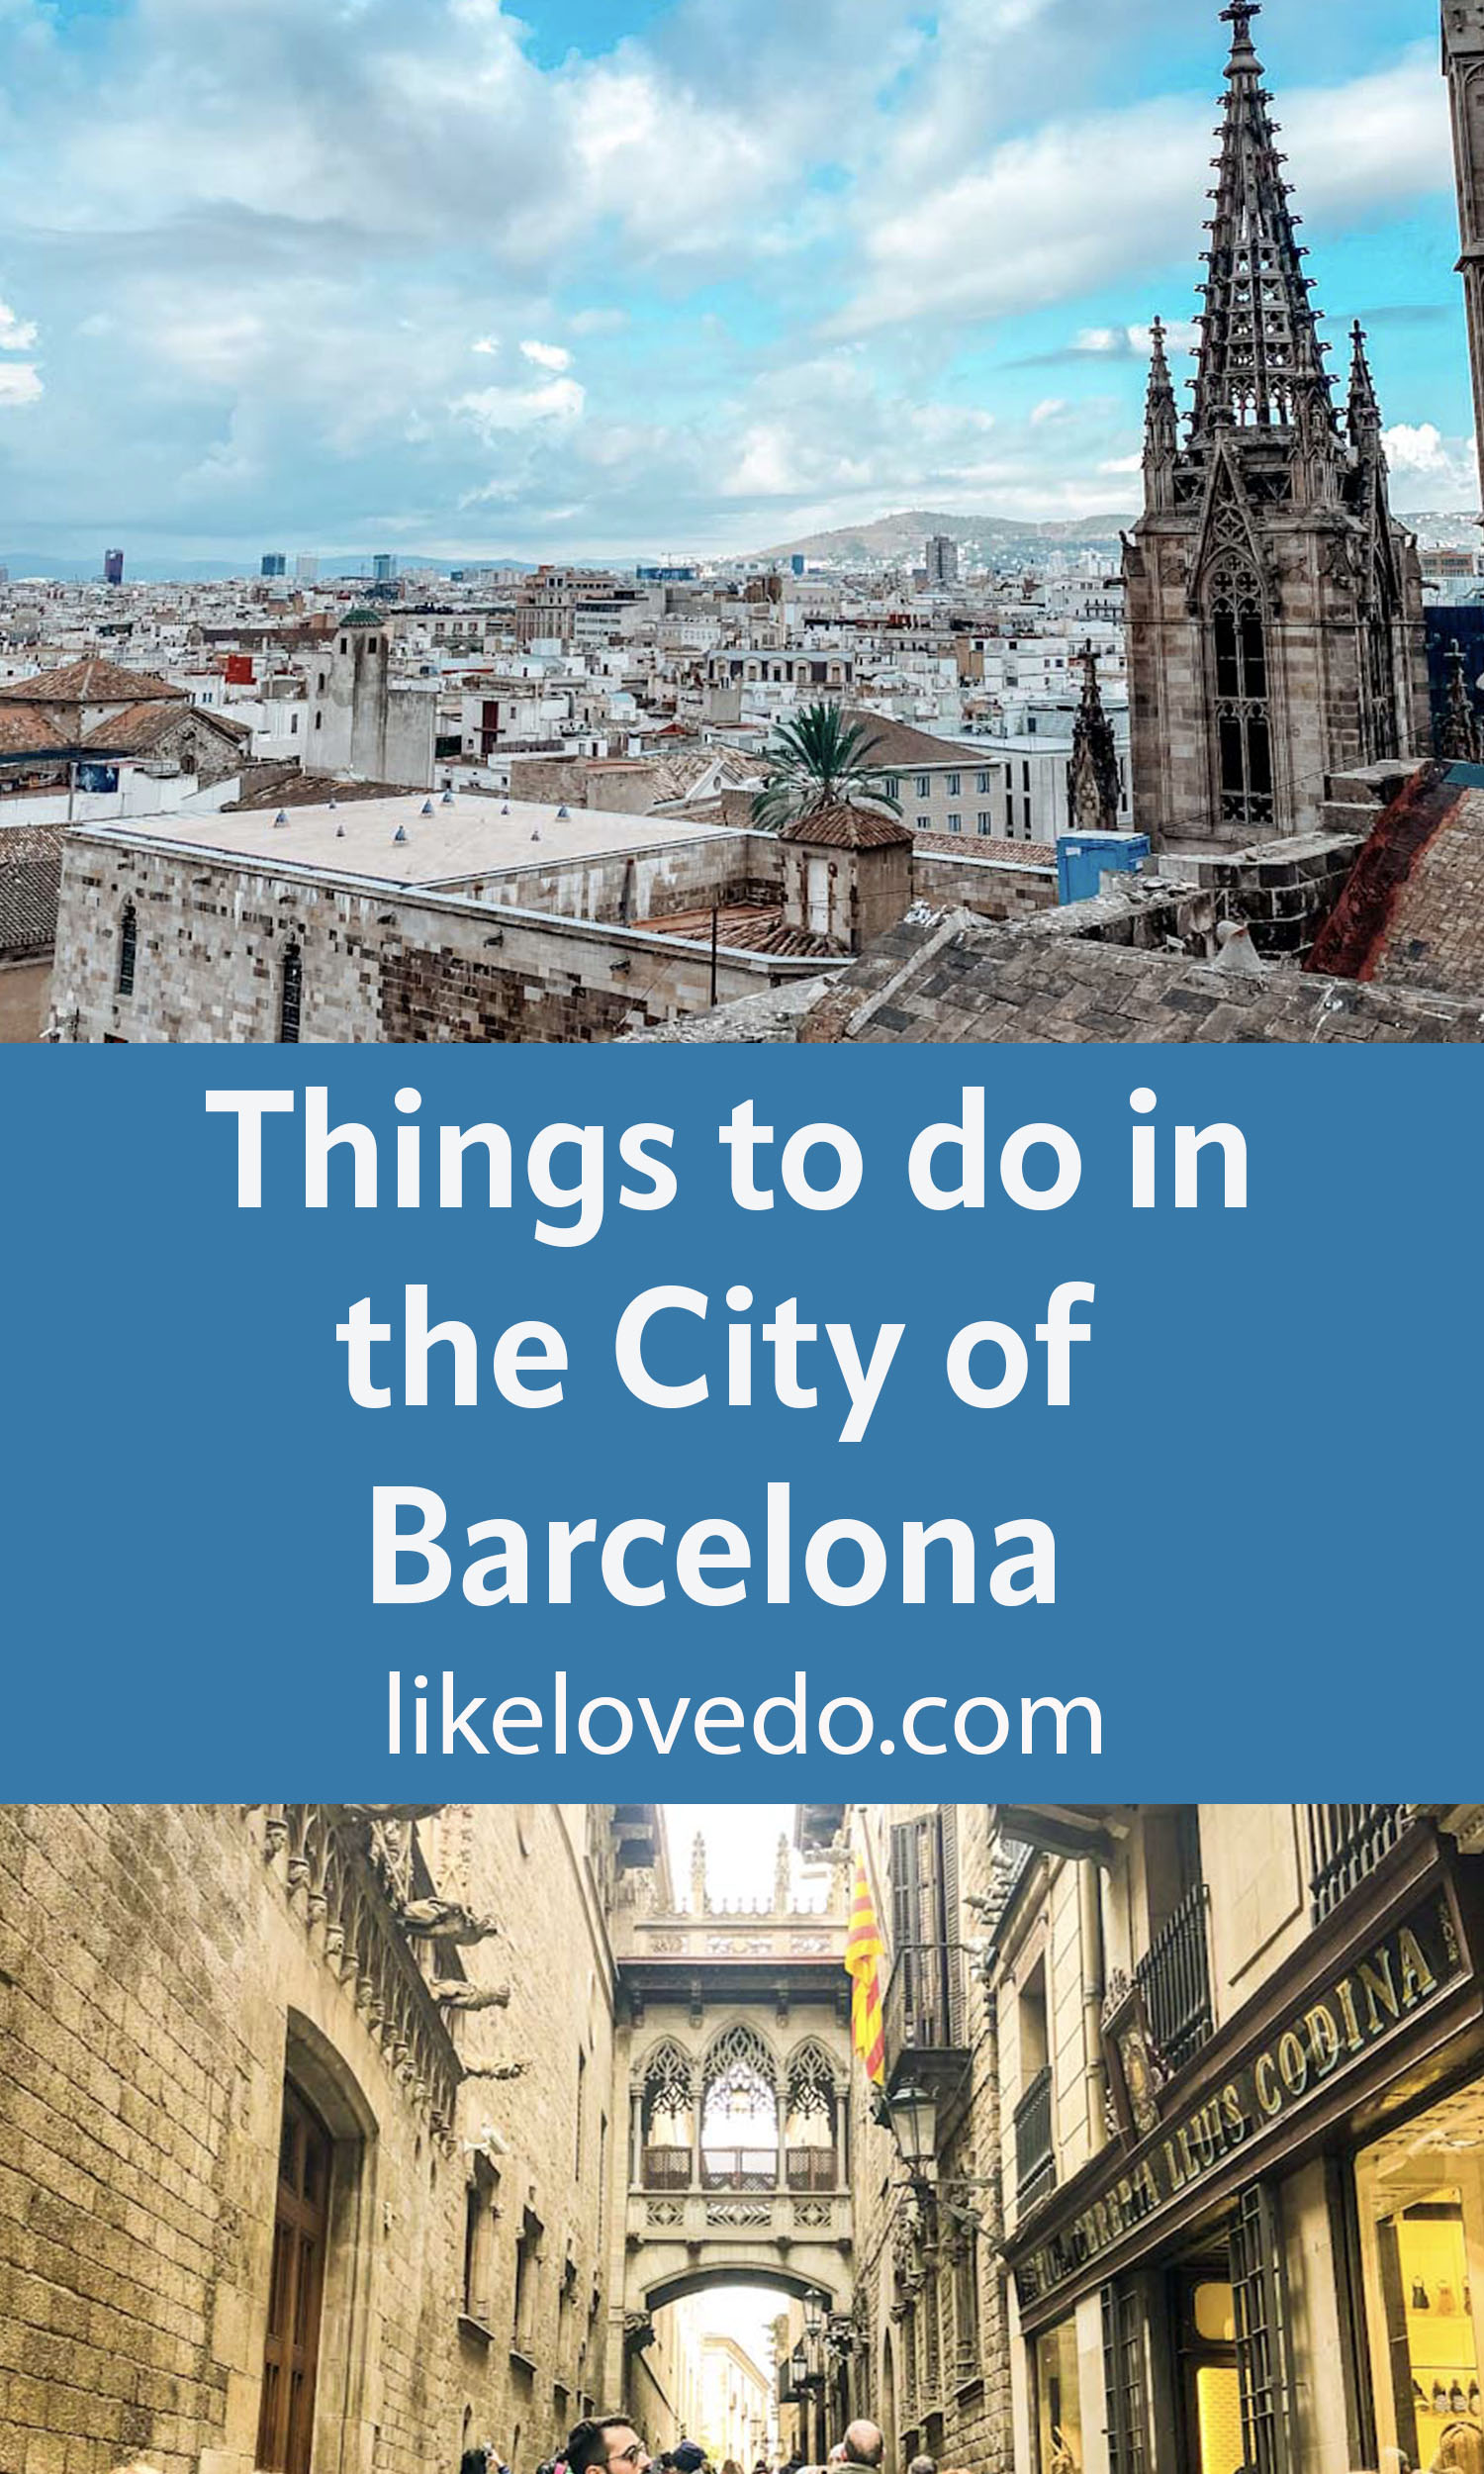 Things to do in Barcelona City